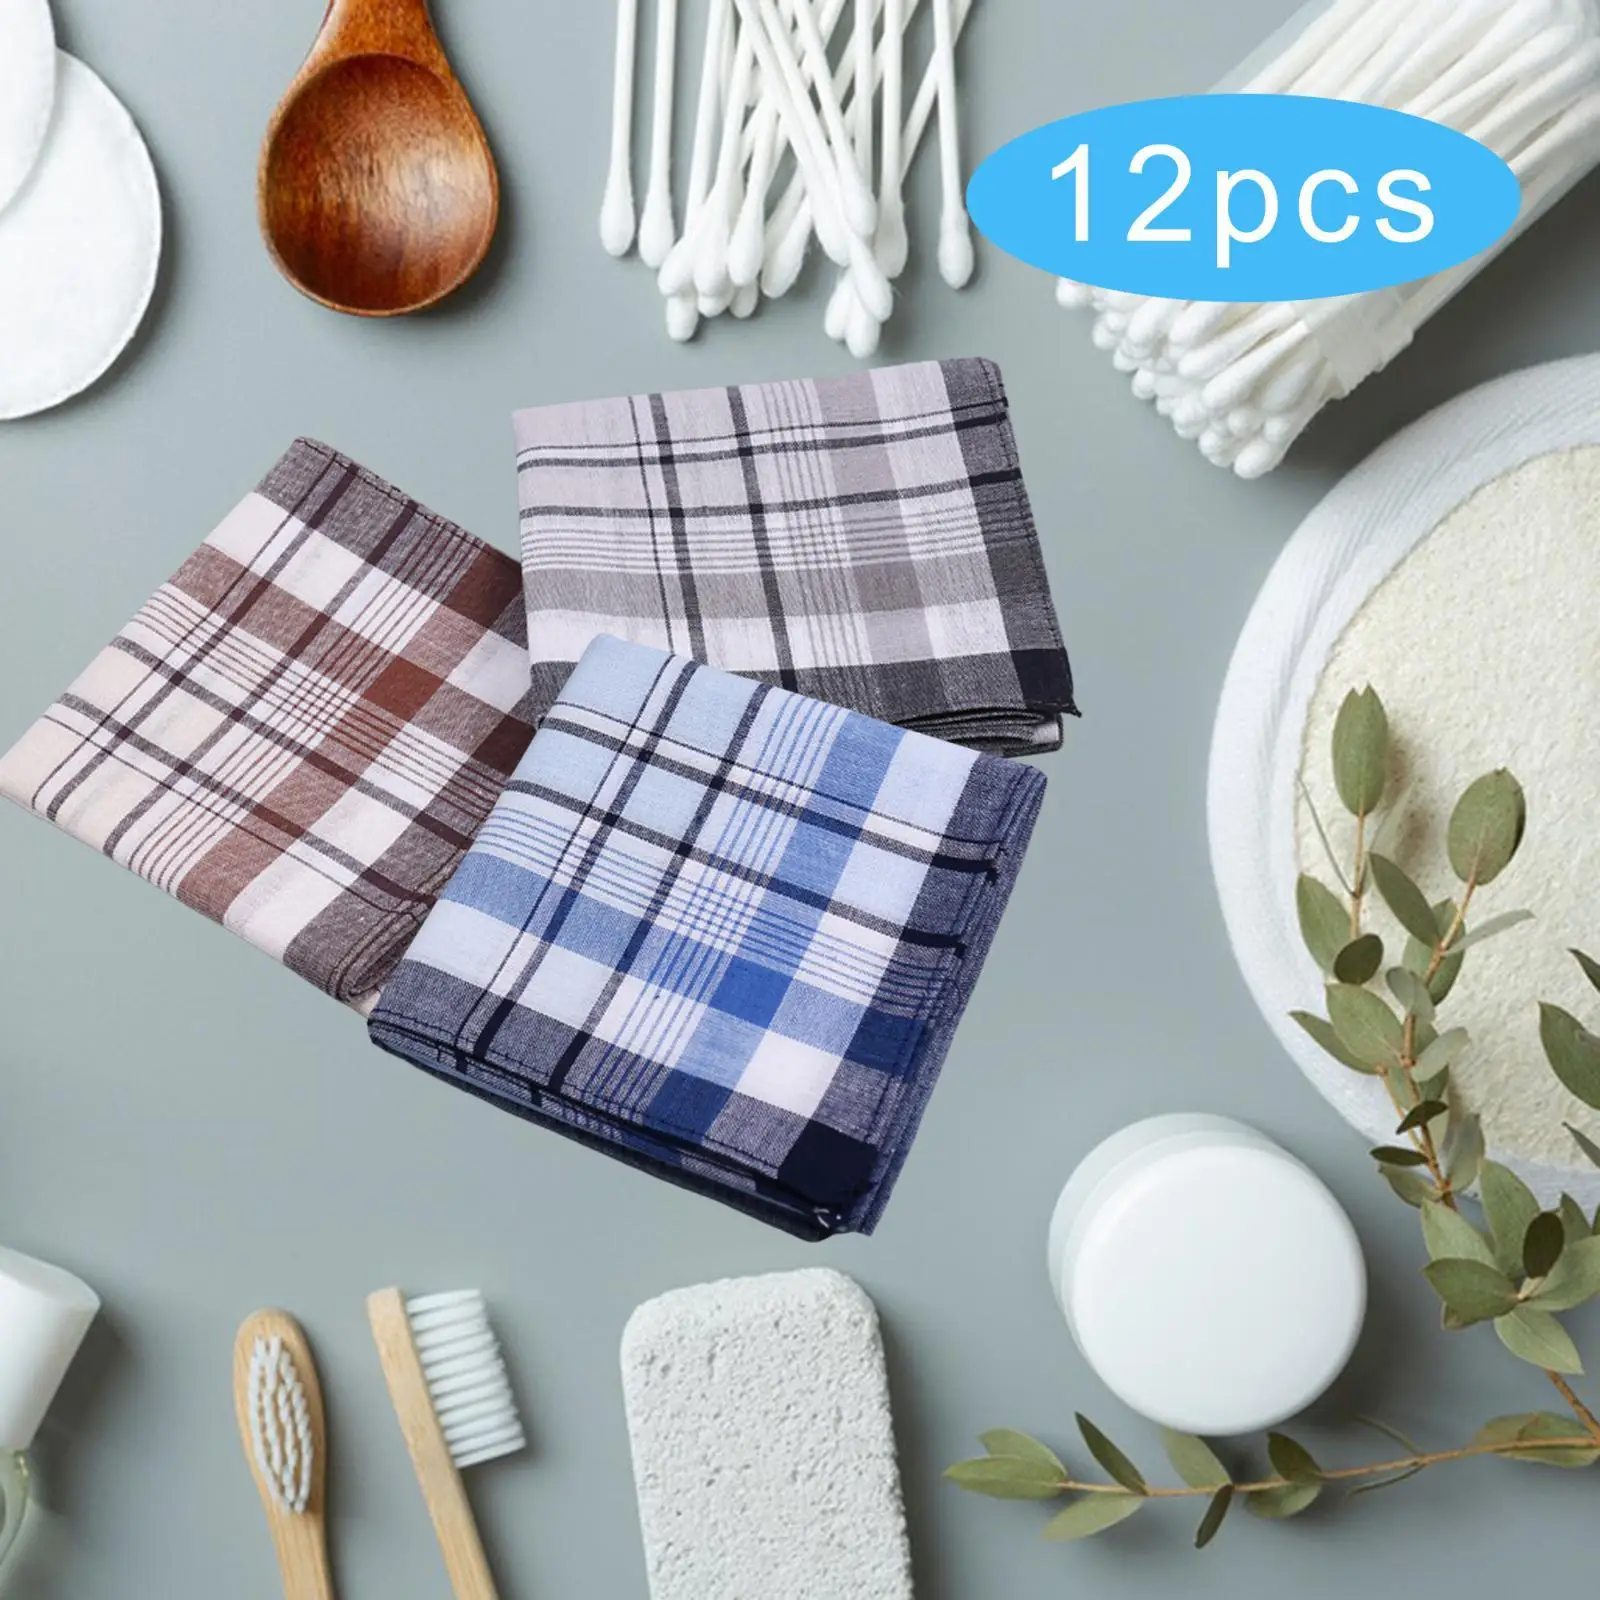 12x Cotton Men`s Handkerchiefs Assorted Gifts 40cm Hanky Pocket Square Hankies for Prom Celebration Grandfathers Casual Formal